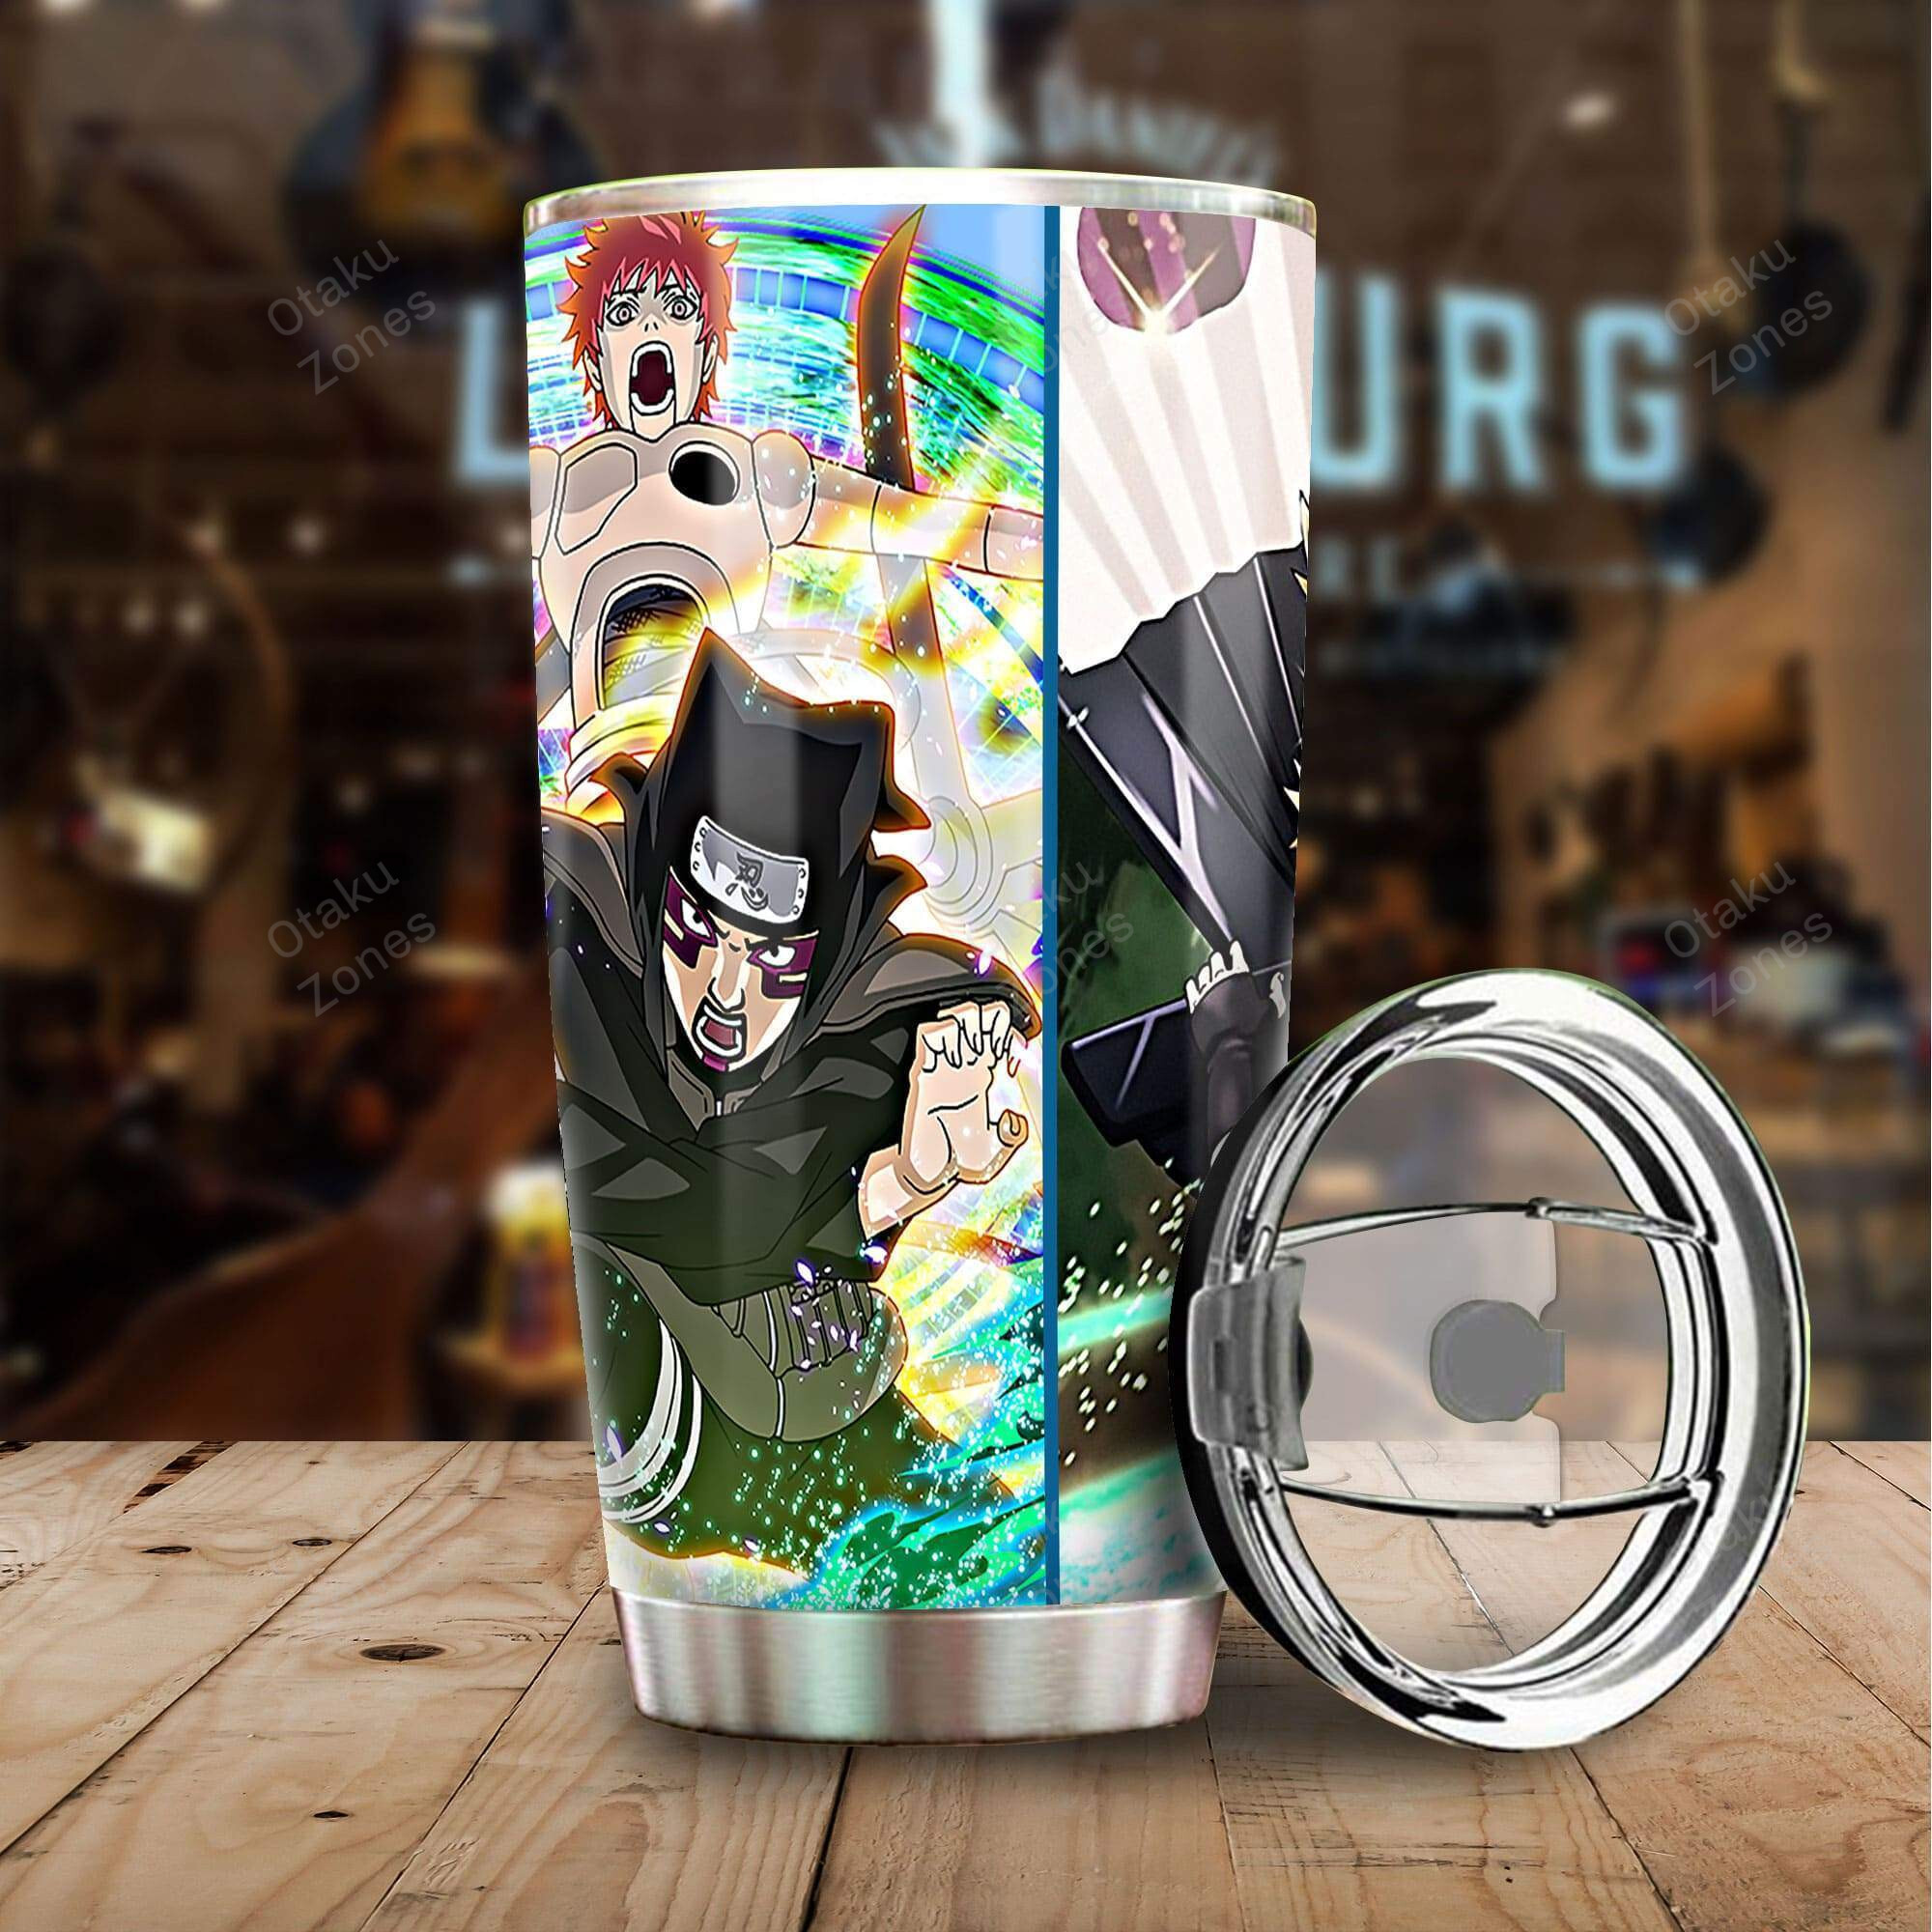 Go ahead and order your new tumbler now! 62